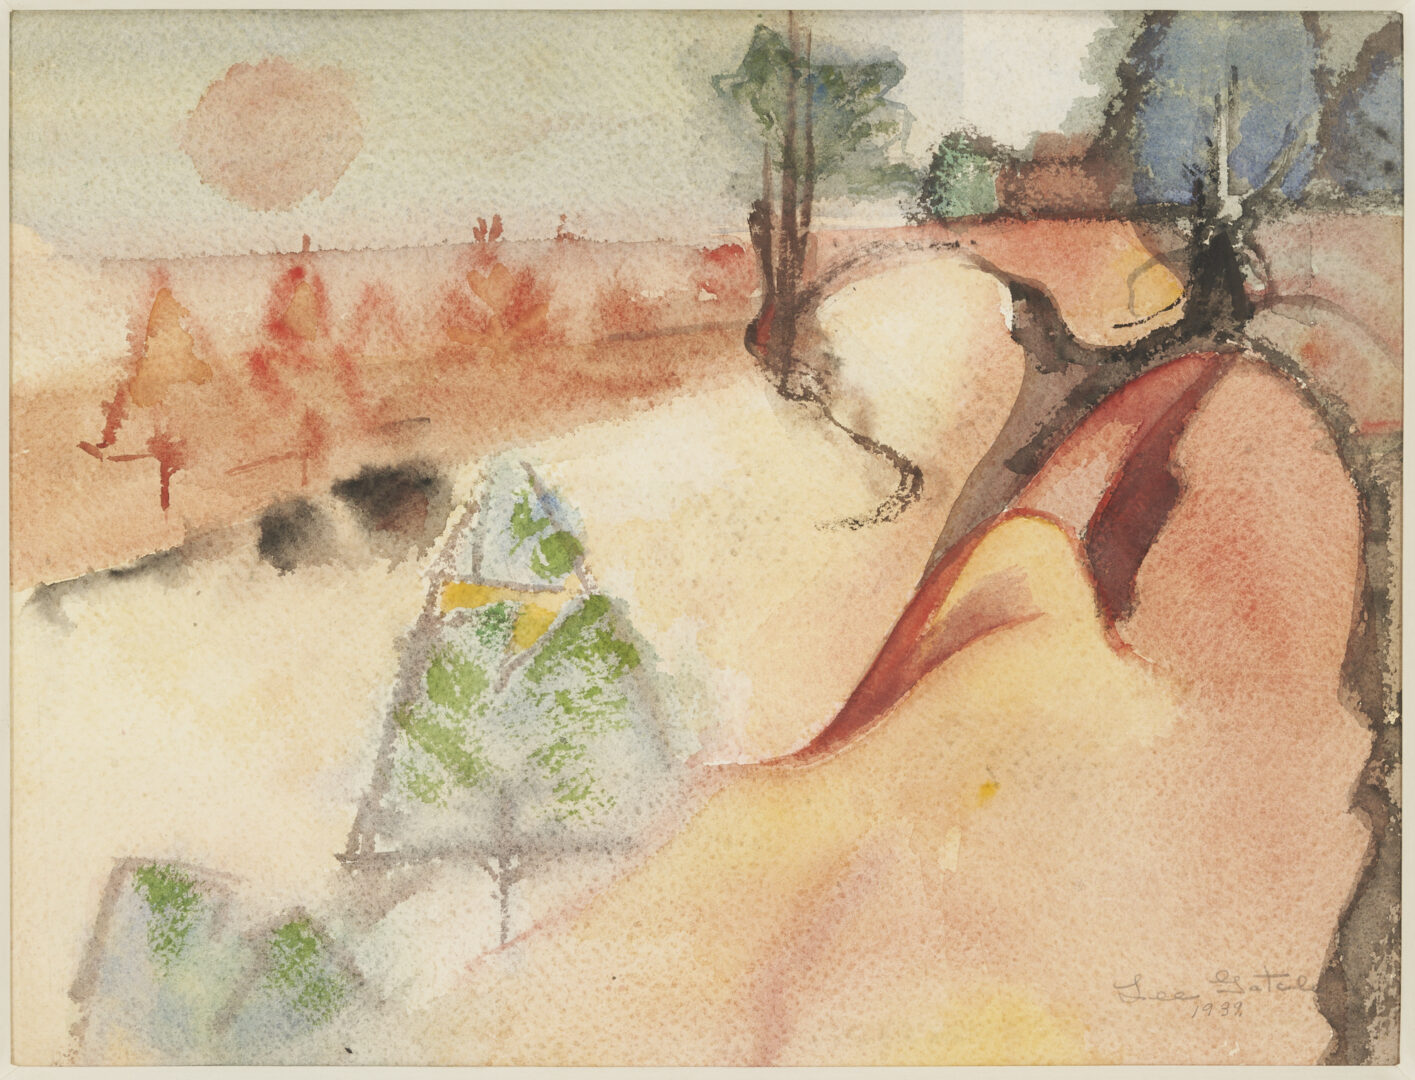 Lot 490: Lee Gatch W/C "The Passing Land," 1939, Exhibited